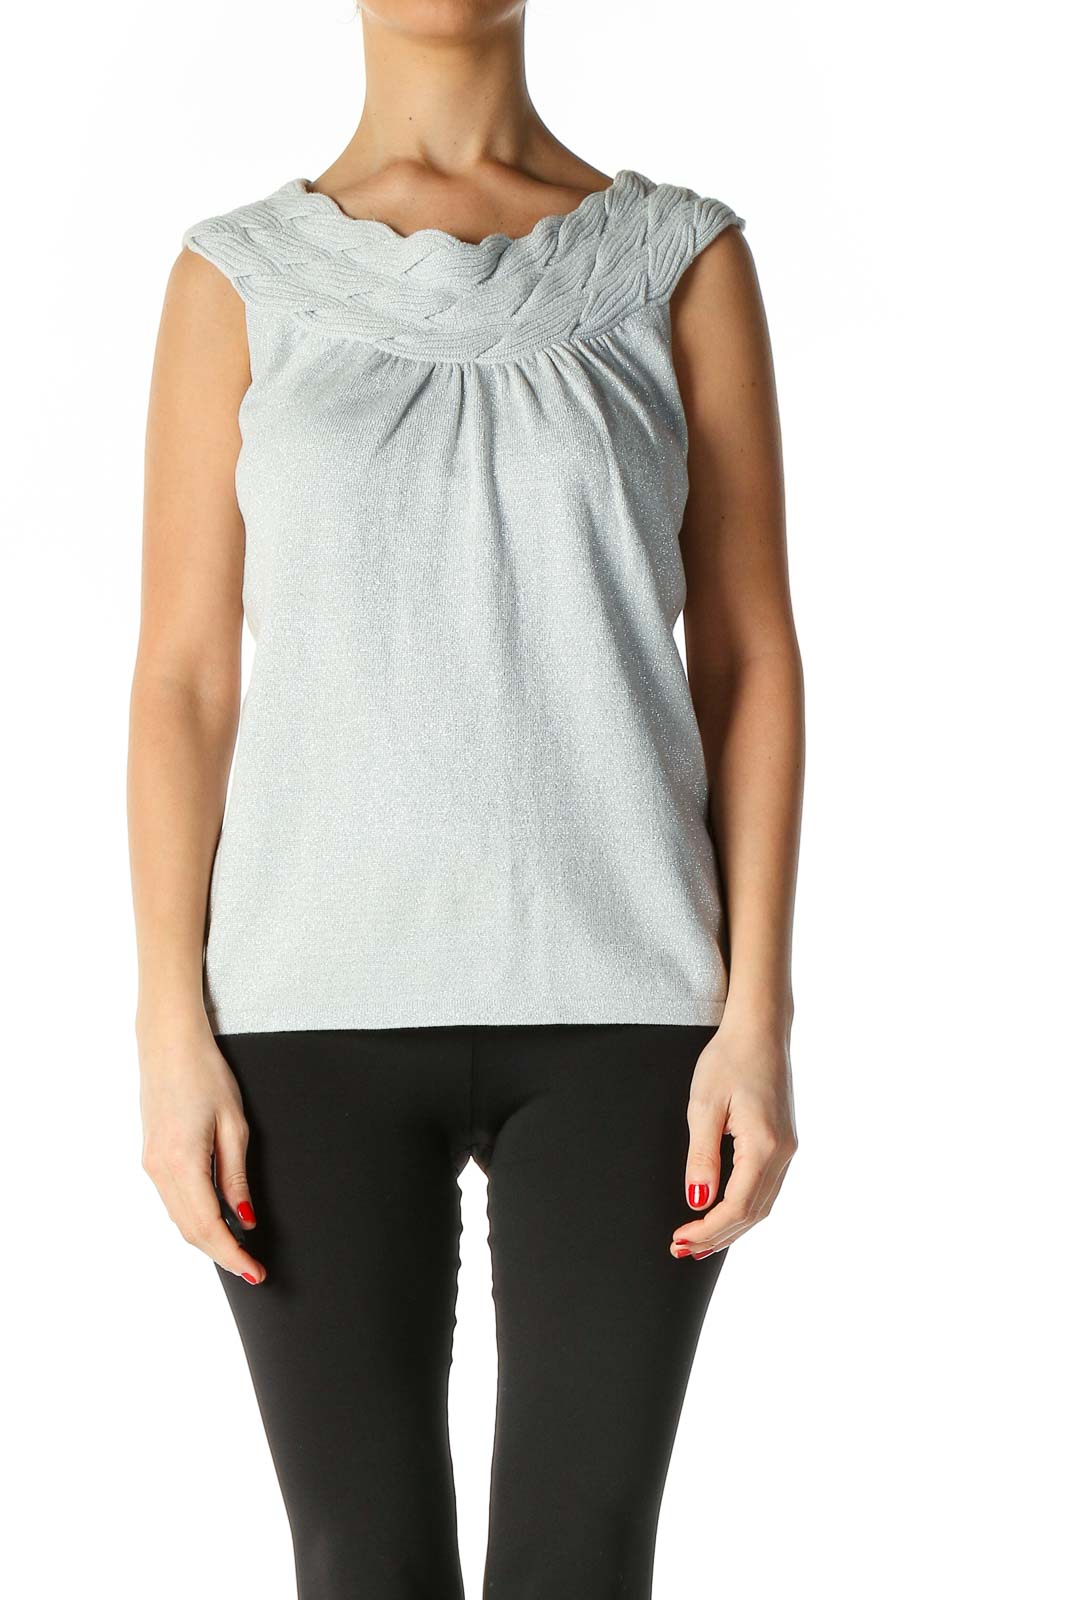 Gray Solid Casual Tank Top Front